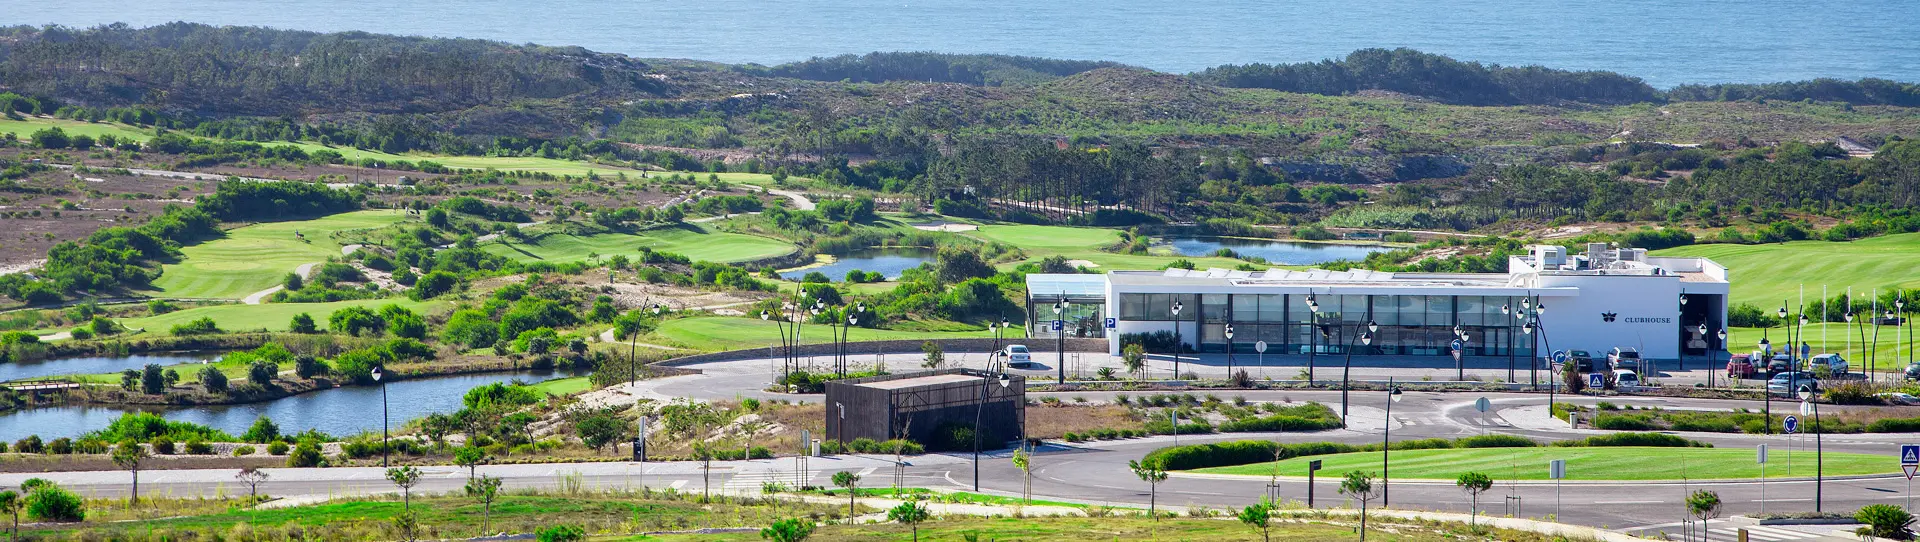 Portugal golf holidays - 3 Nights BB & 2 Golf Rounds - Photo 3